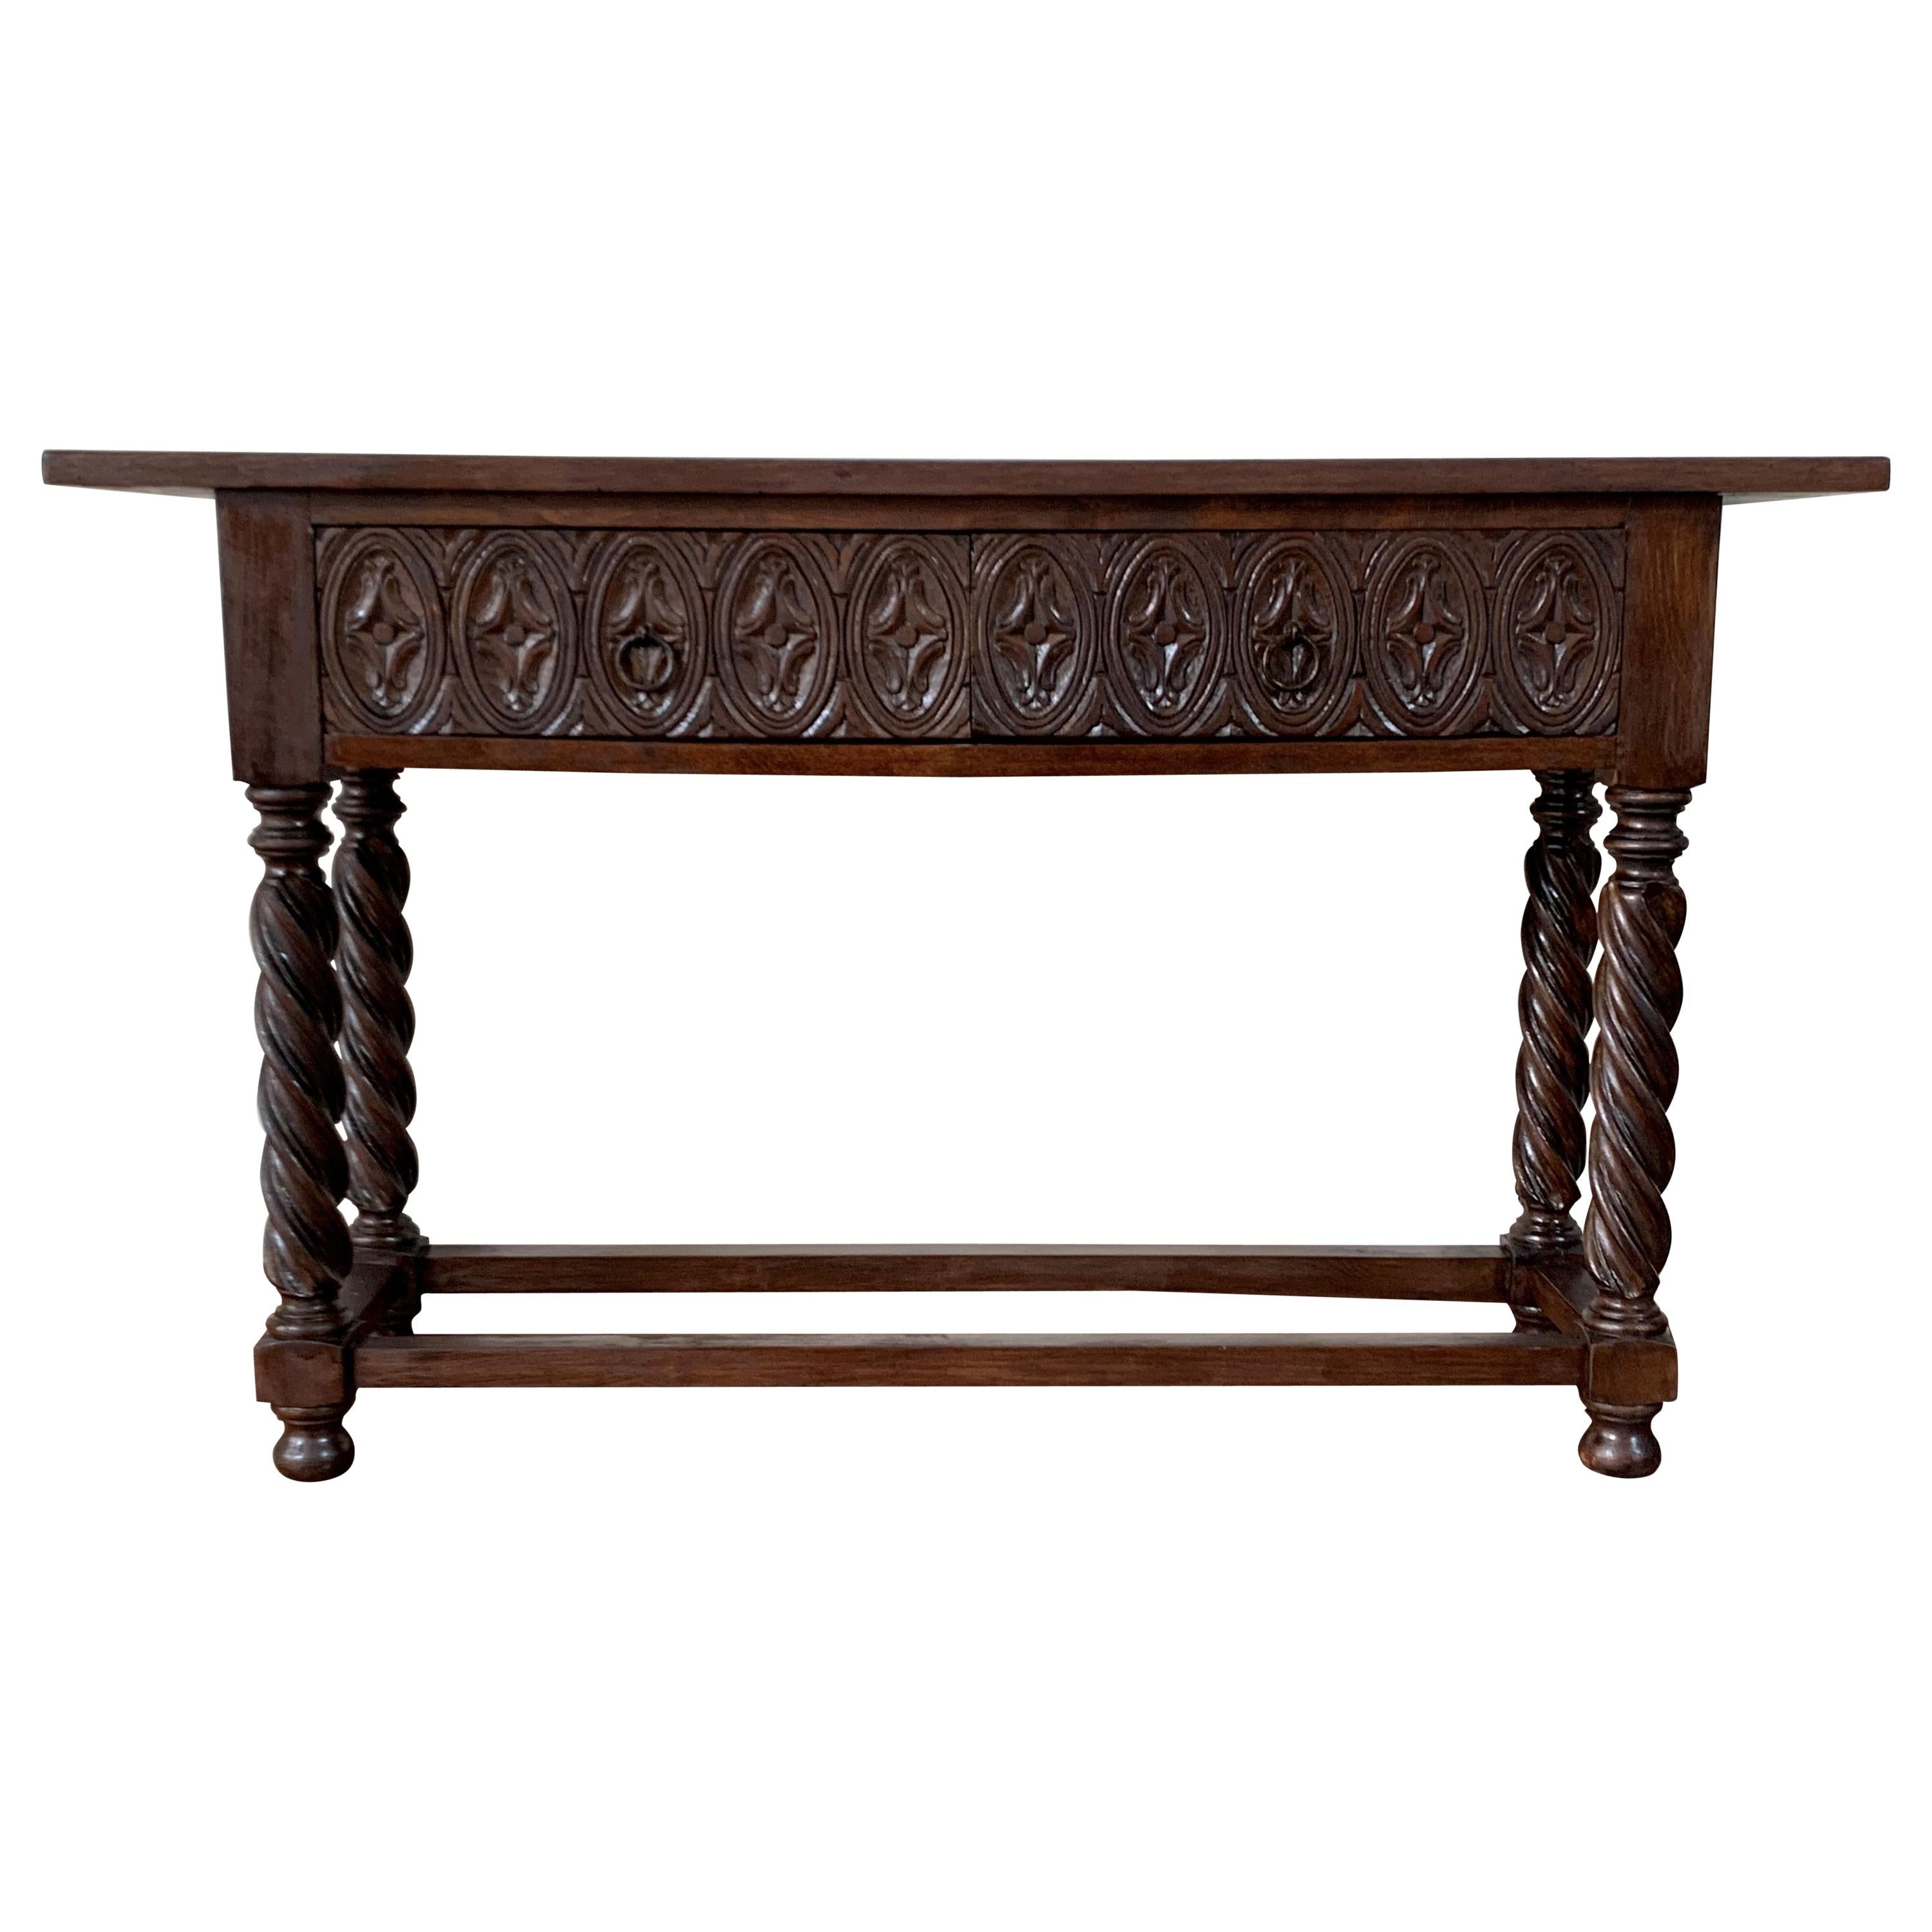 18th Carved Two-Drawer Baroque Spanish Walnut Console Table with Iron Hardware